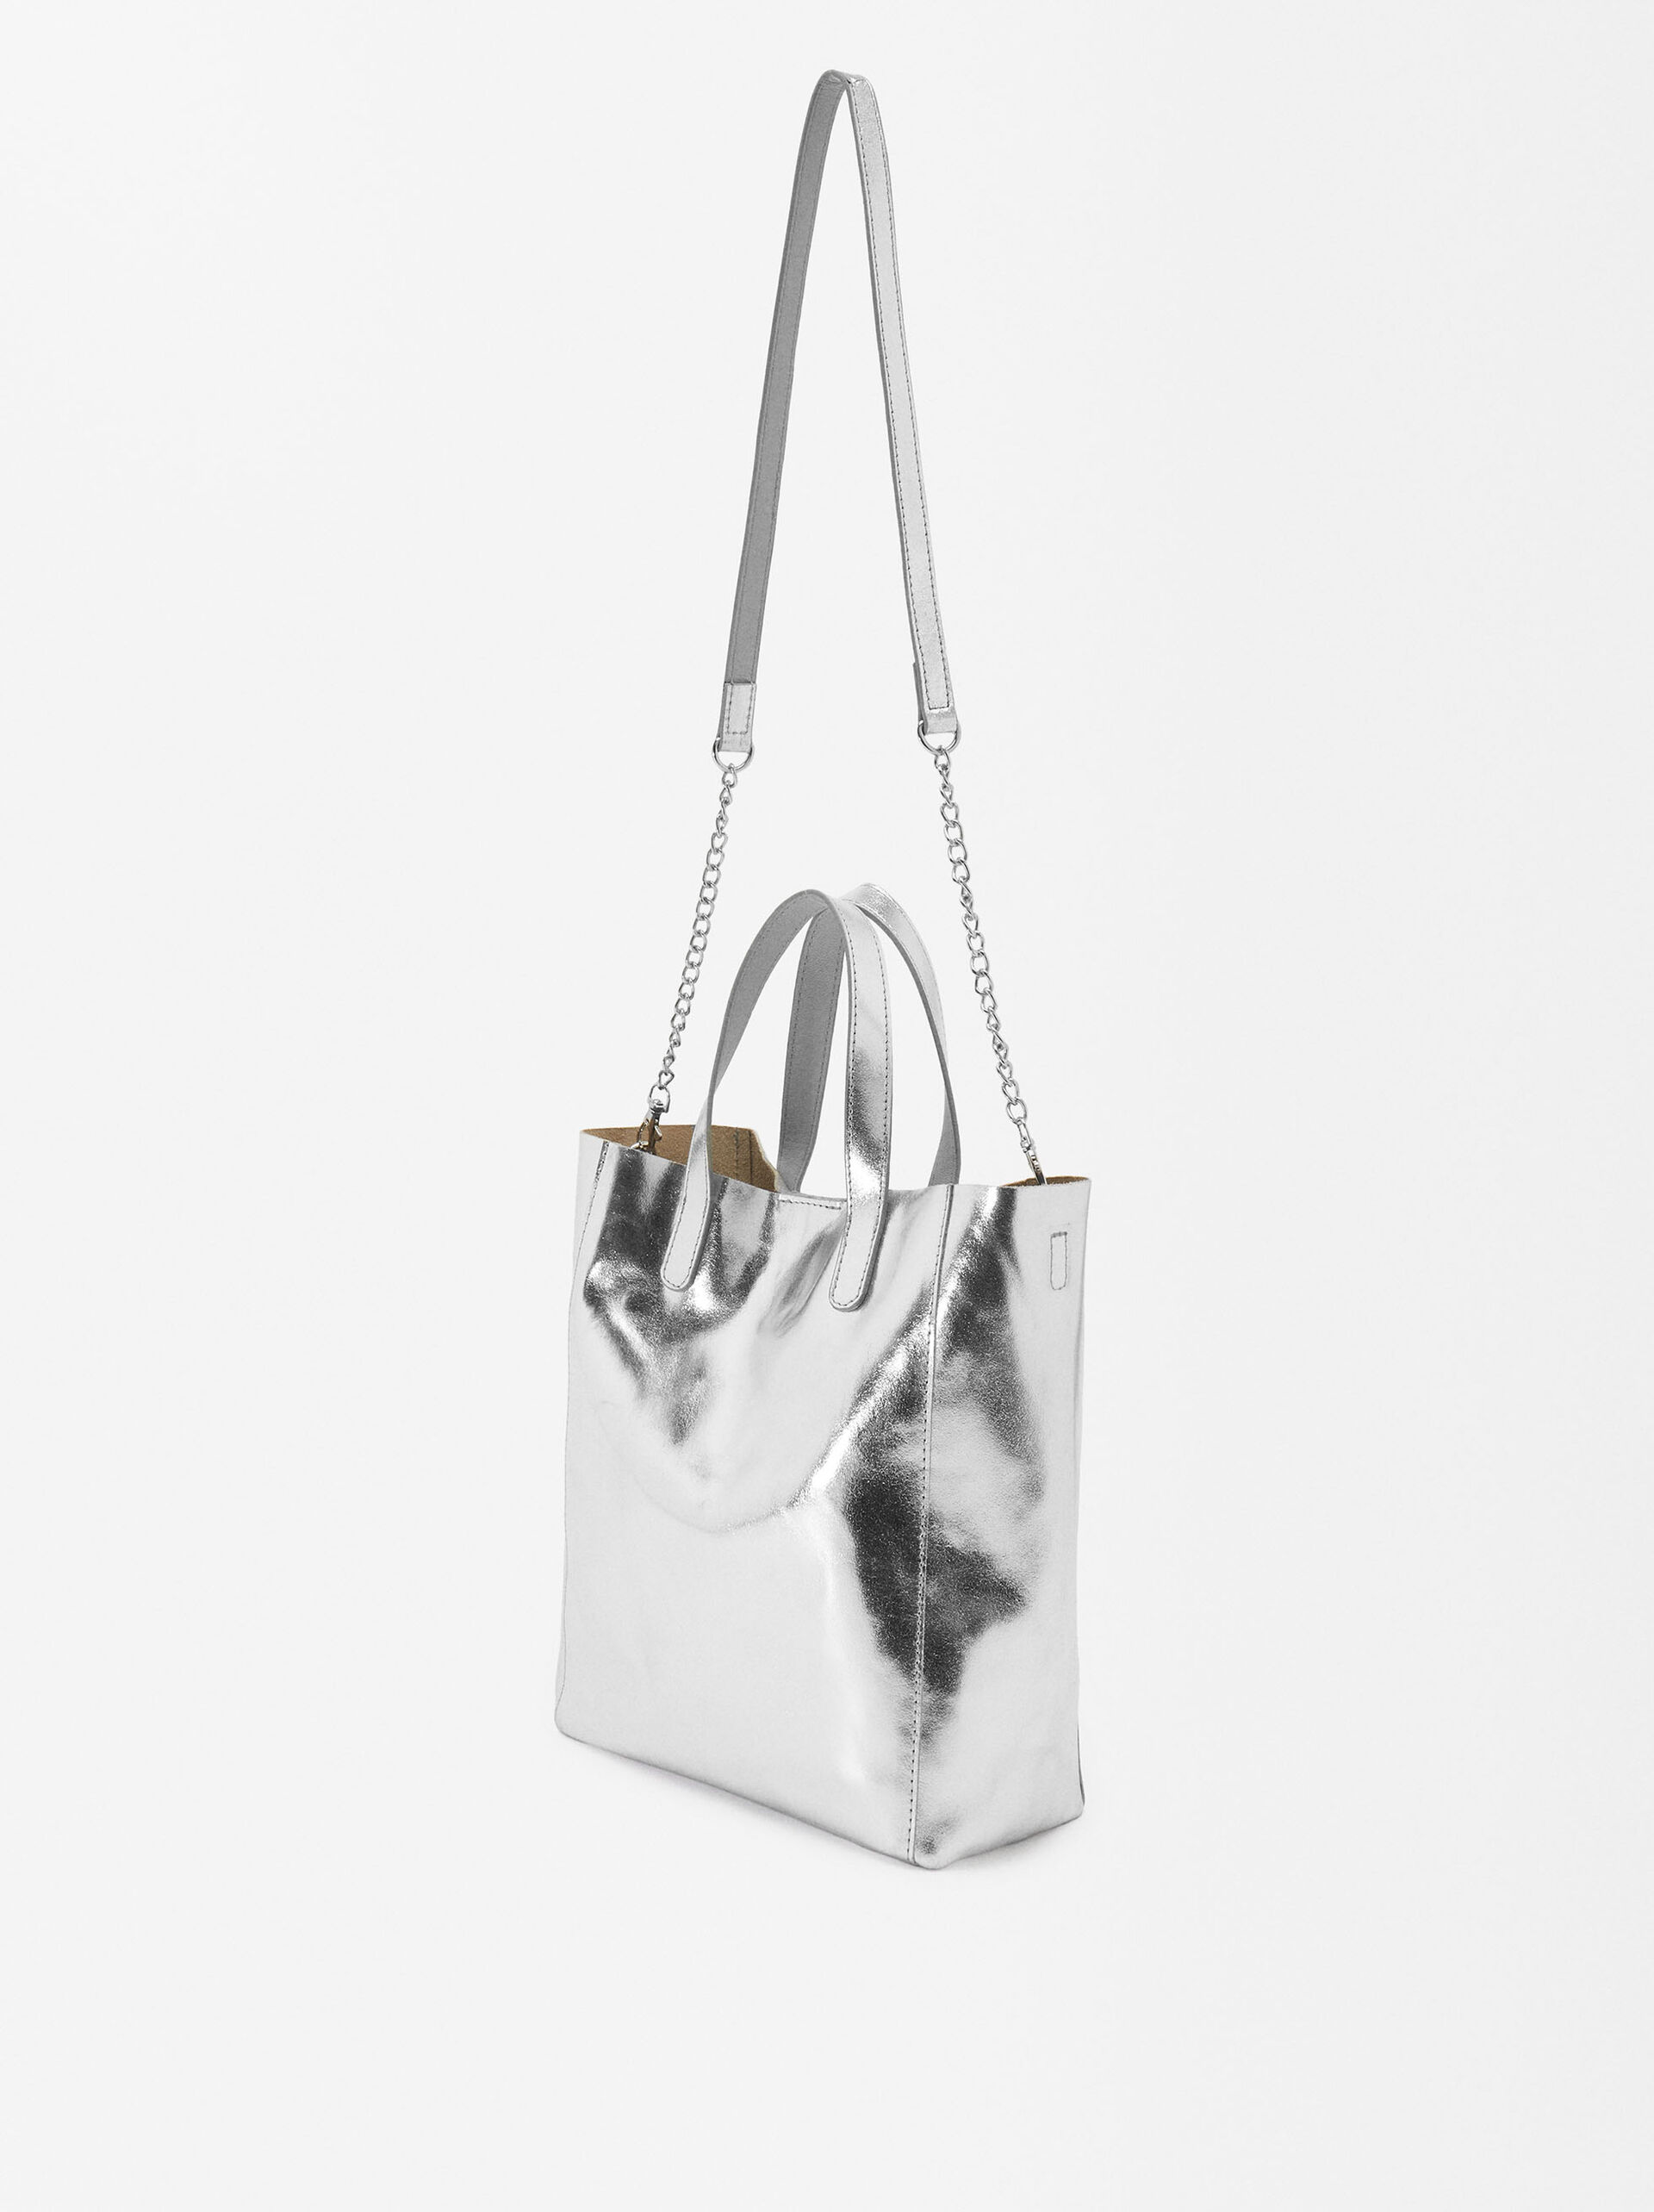 Metallic Leather Shopper Bag - Limited Edition image number 4.0